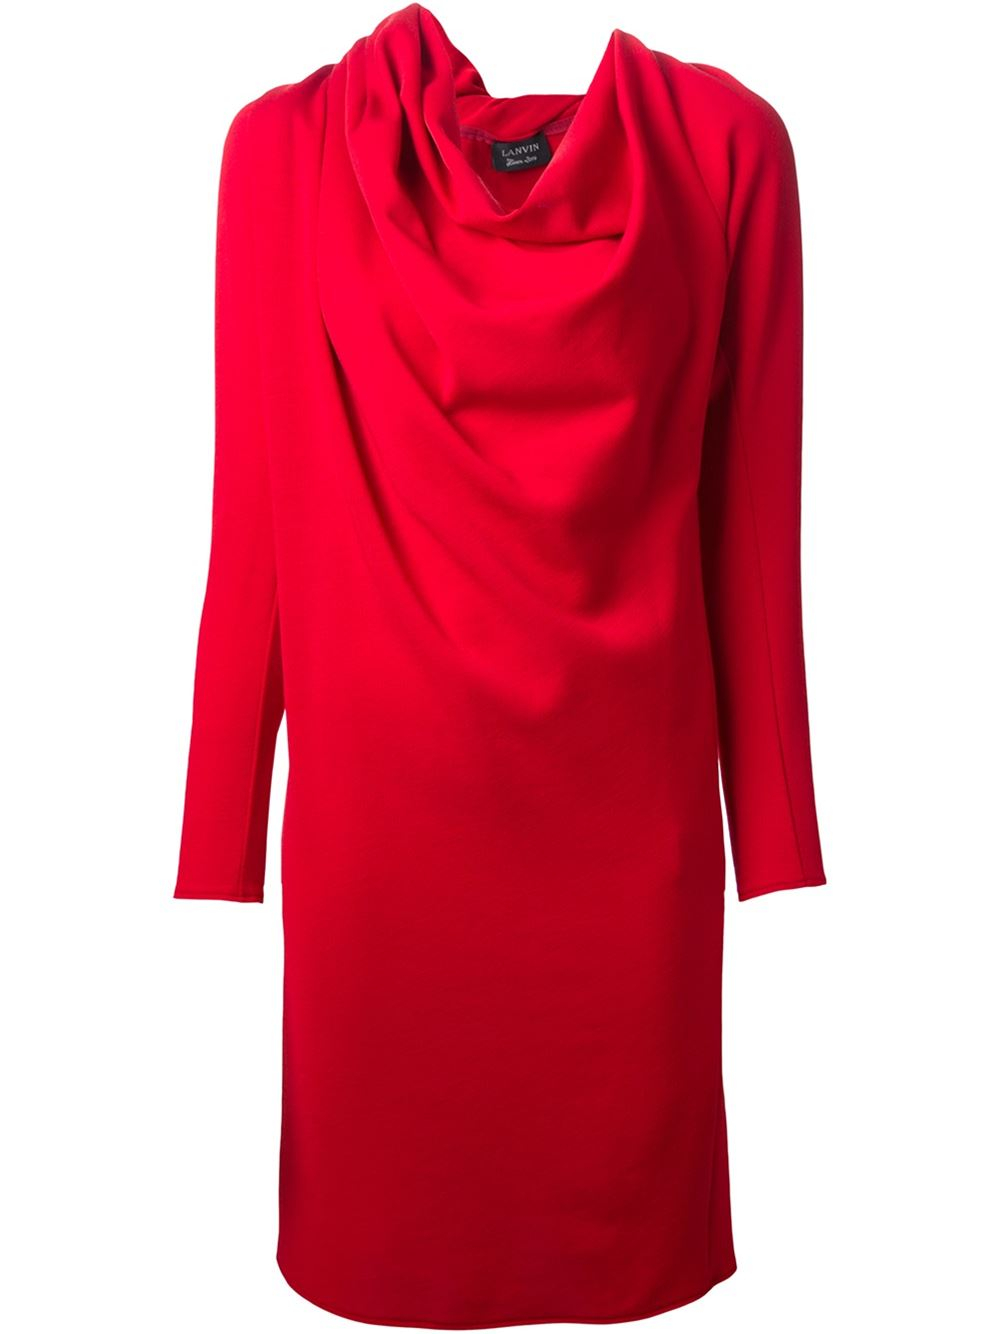 Lanvin Cowl Neck Dress in Red | Lyst